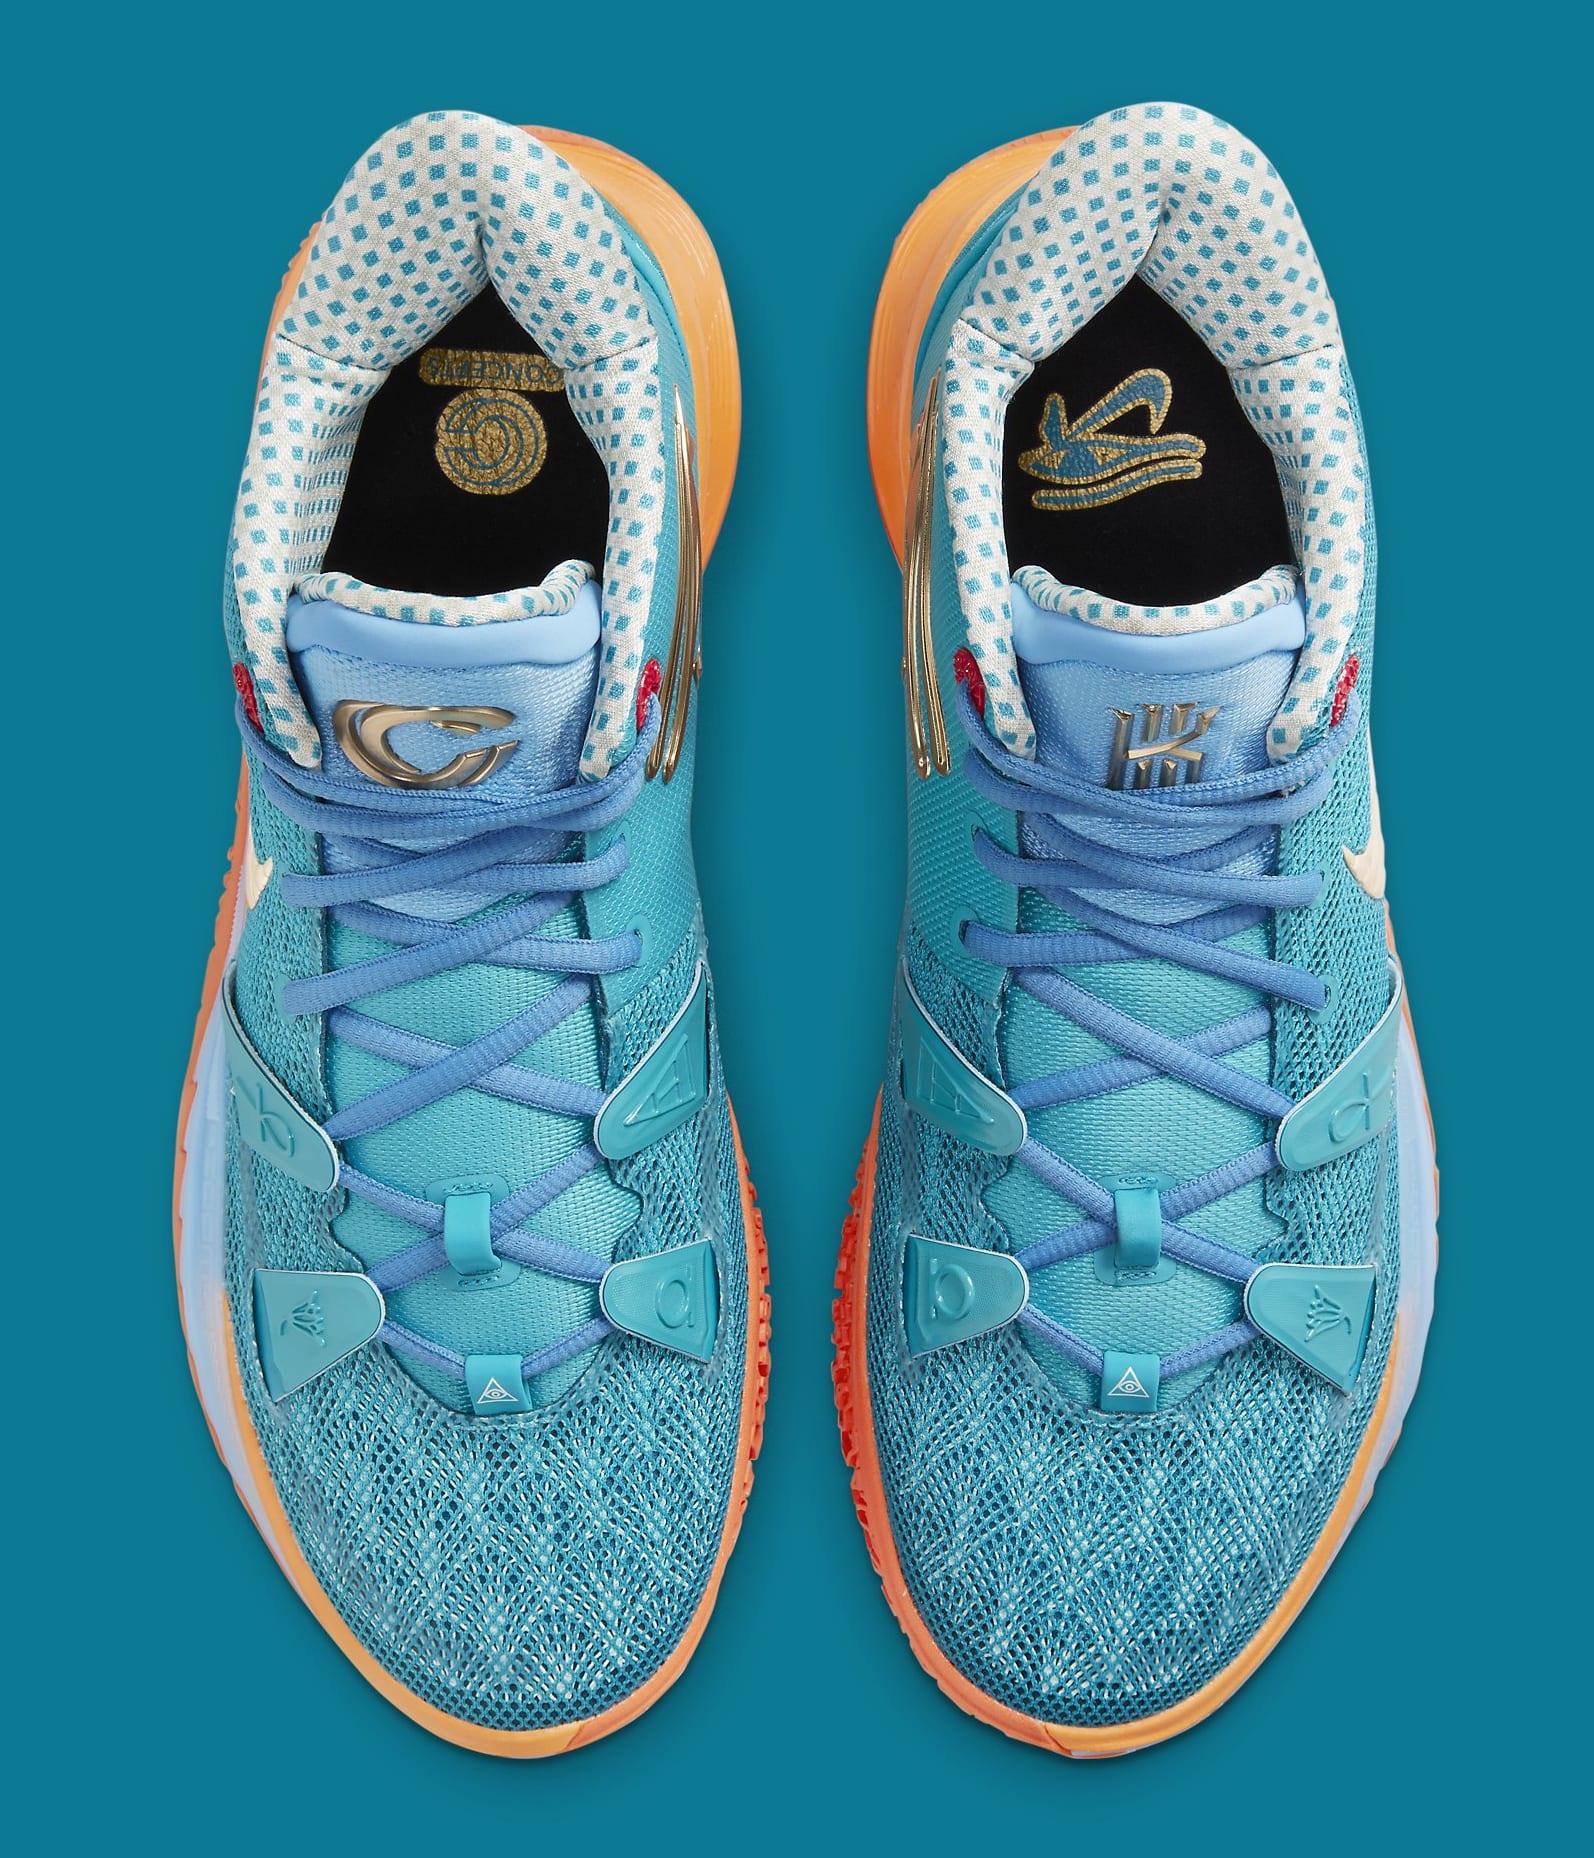 Concepts x Nike Kyrie 7 CT1137-900 Top